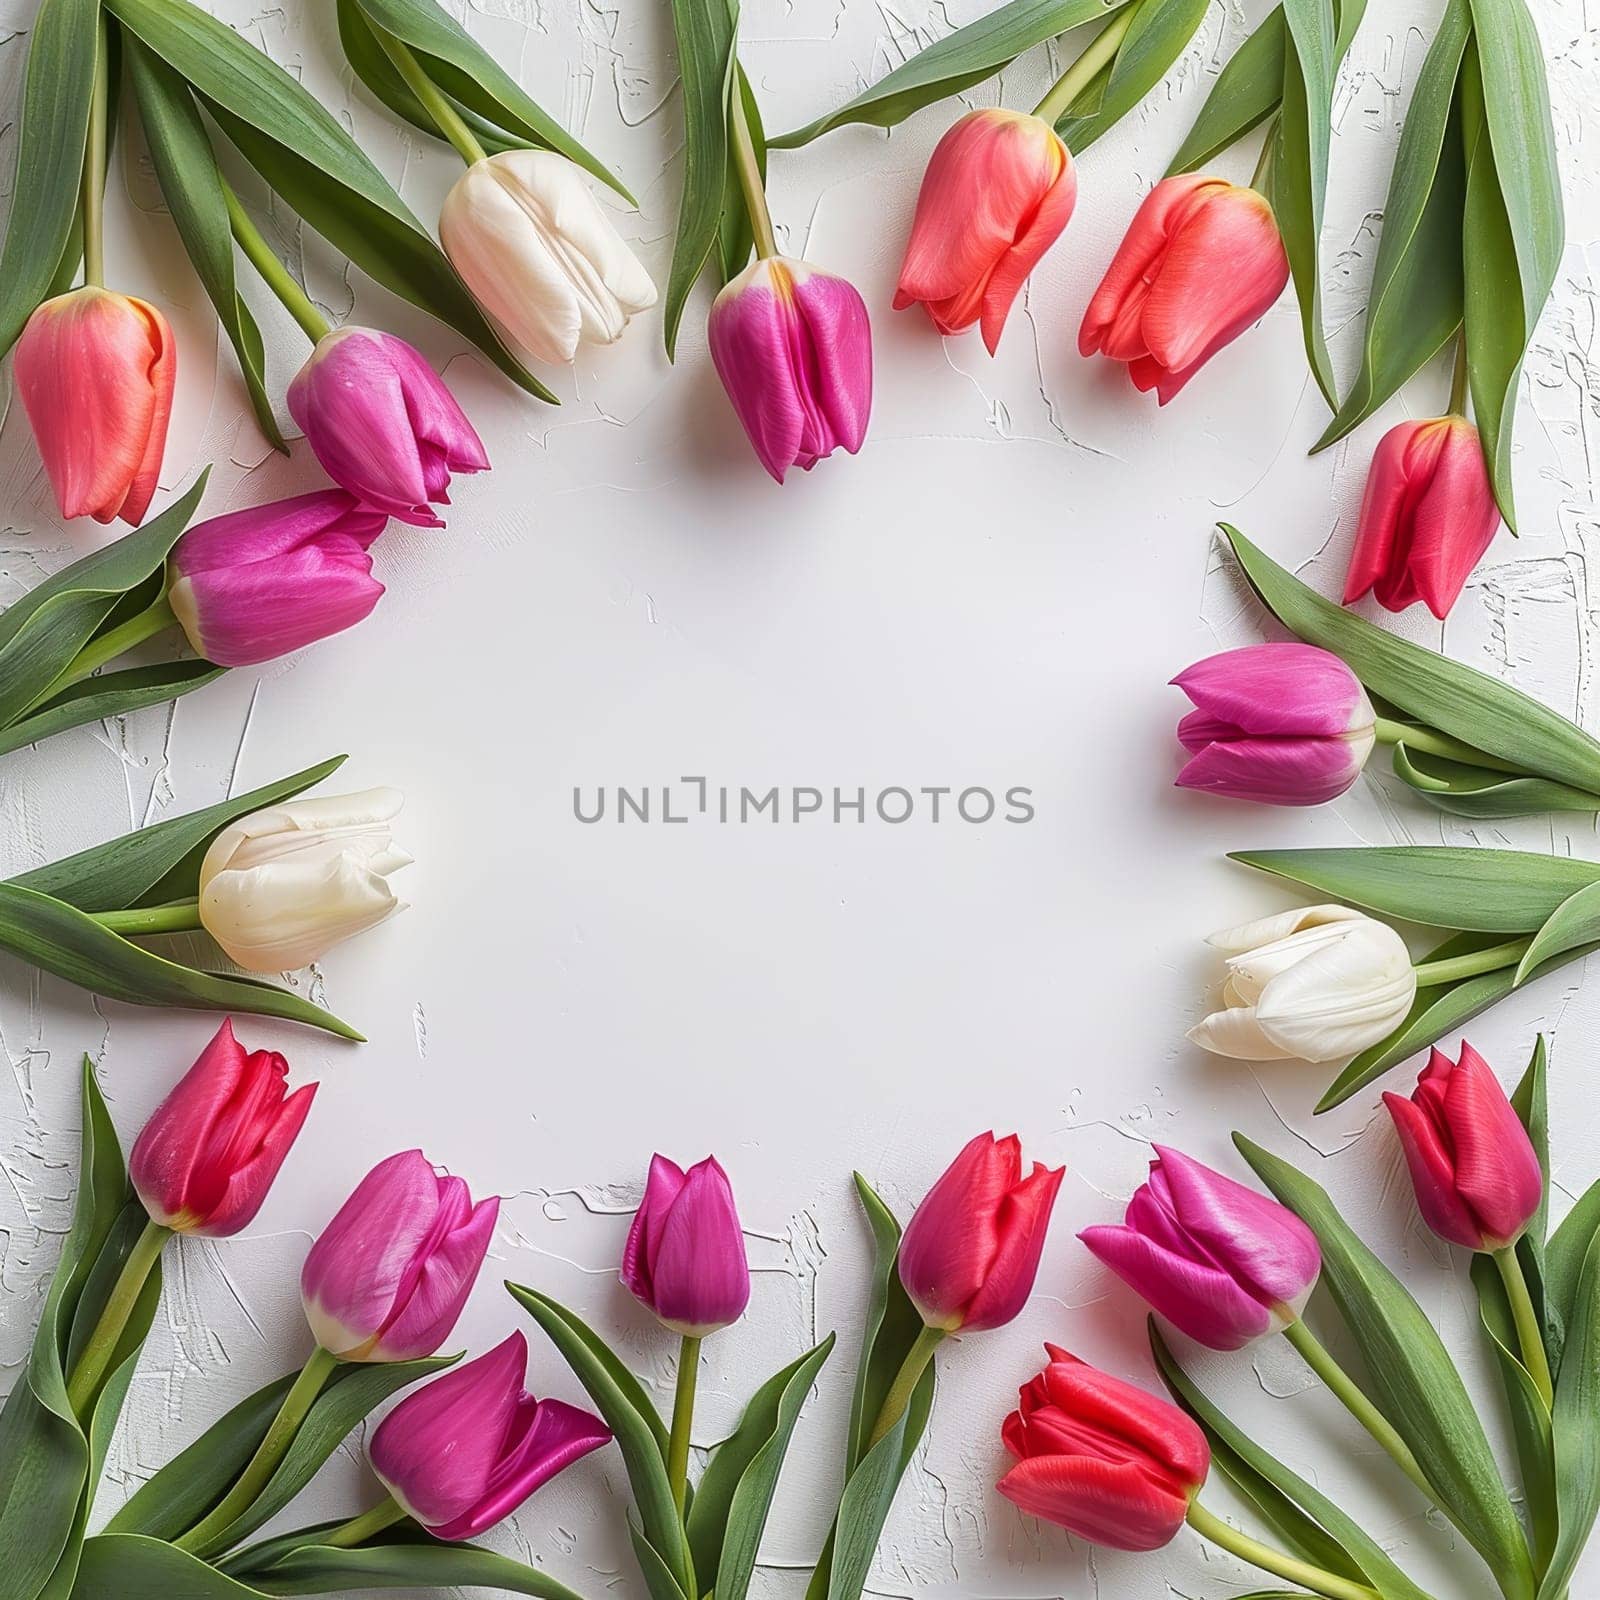 A bouquet of flowers with pink, white, and red tulips arranged in a circle by itchaznong